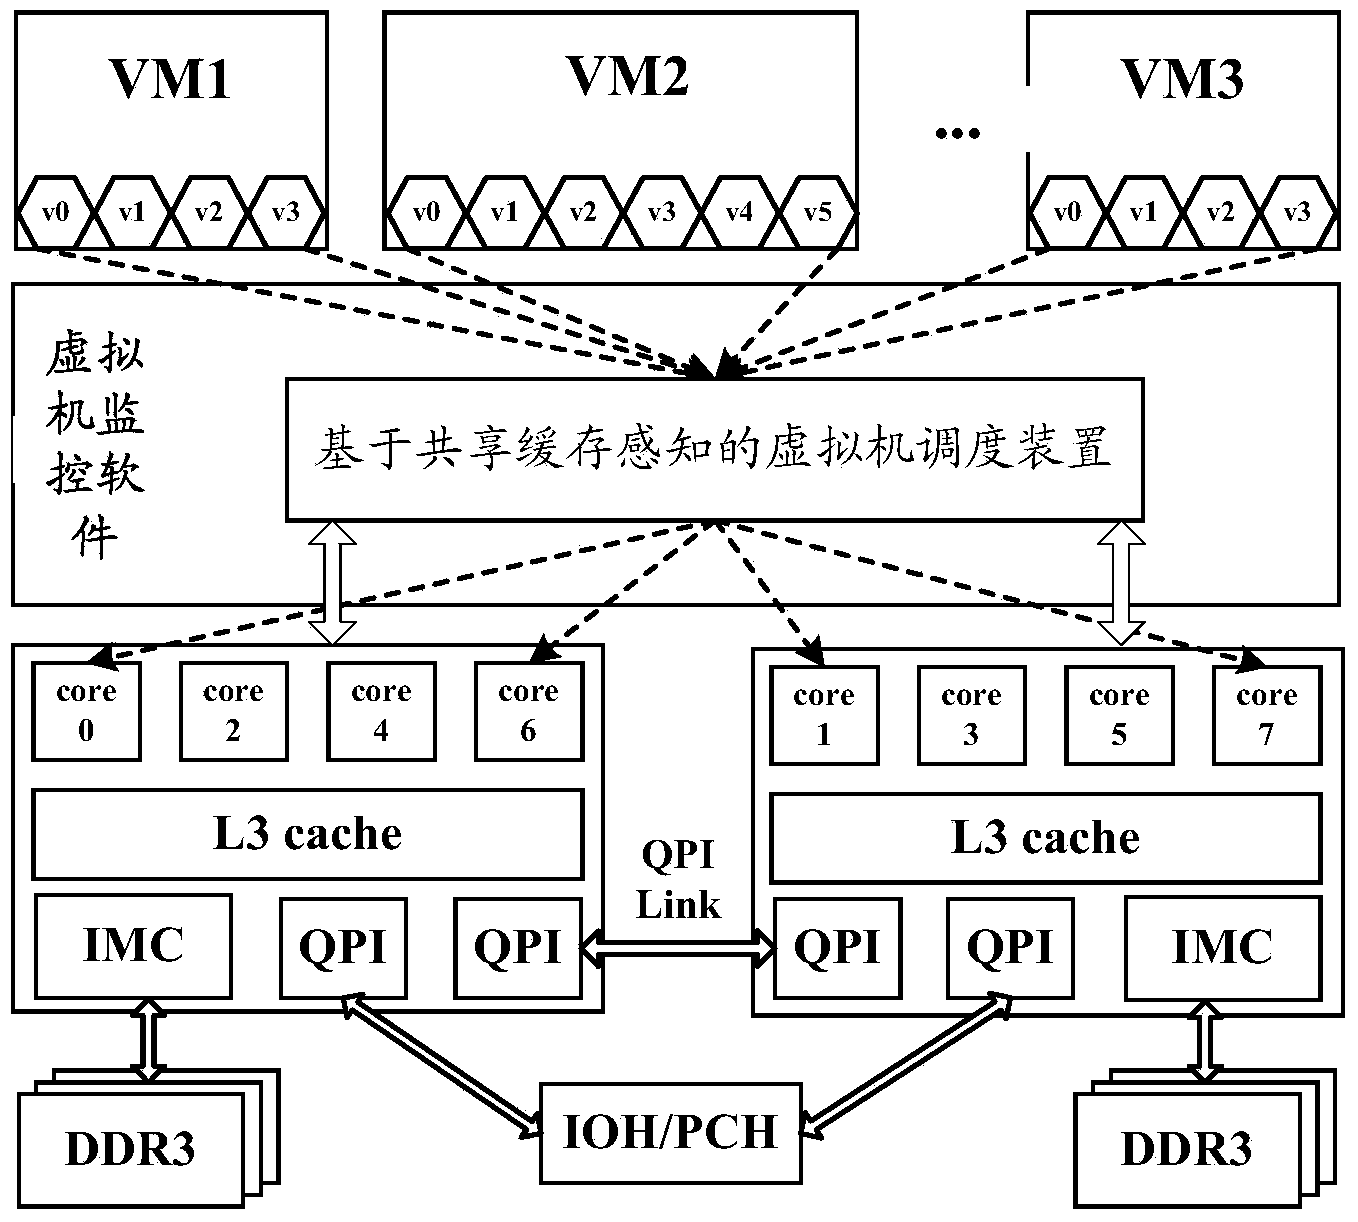 Share cache perception-based virtual machine scheduling method and device